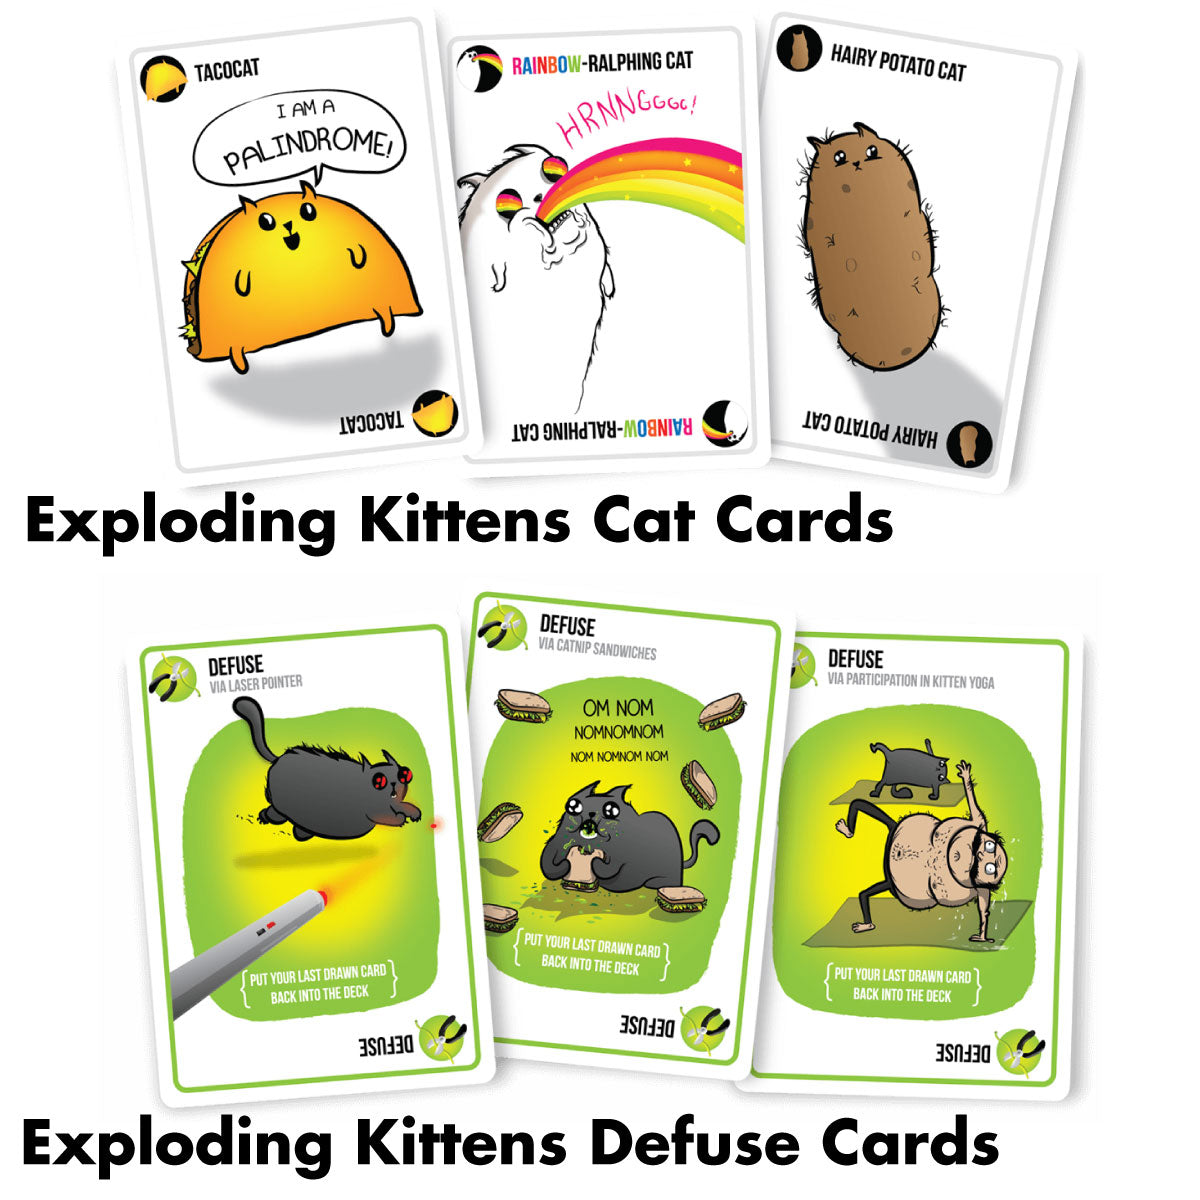 Exploding Kittens Card Game Cat Cards & Defuse Cards